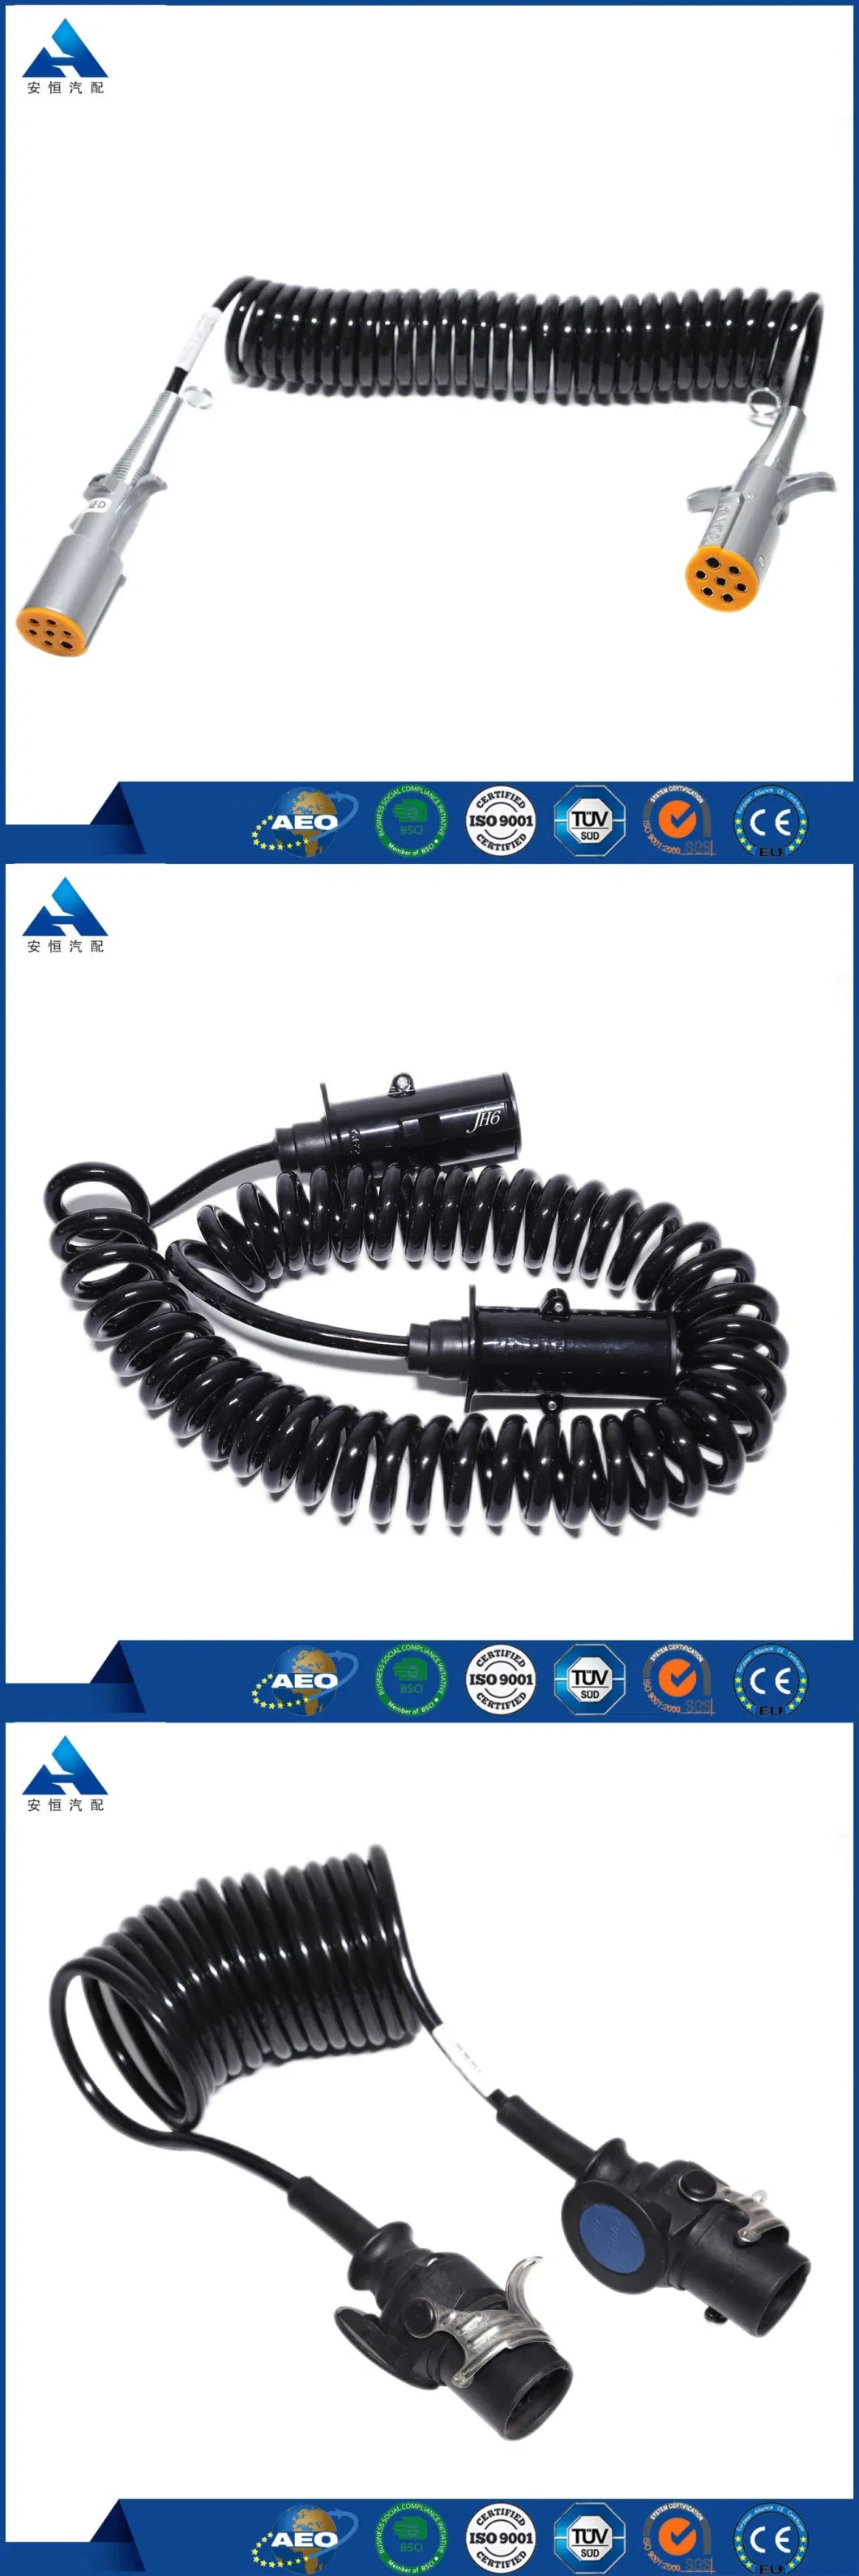 Wholesale Cable 7 Pole Ebs Truck Electrical Trailer Spiral Coiled Cable Seven Core Cable Wire